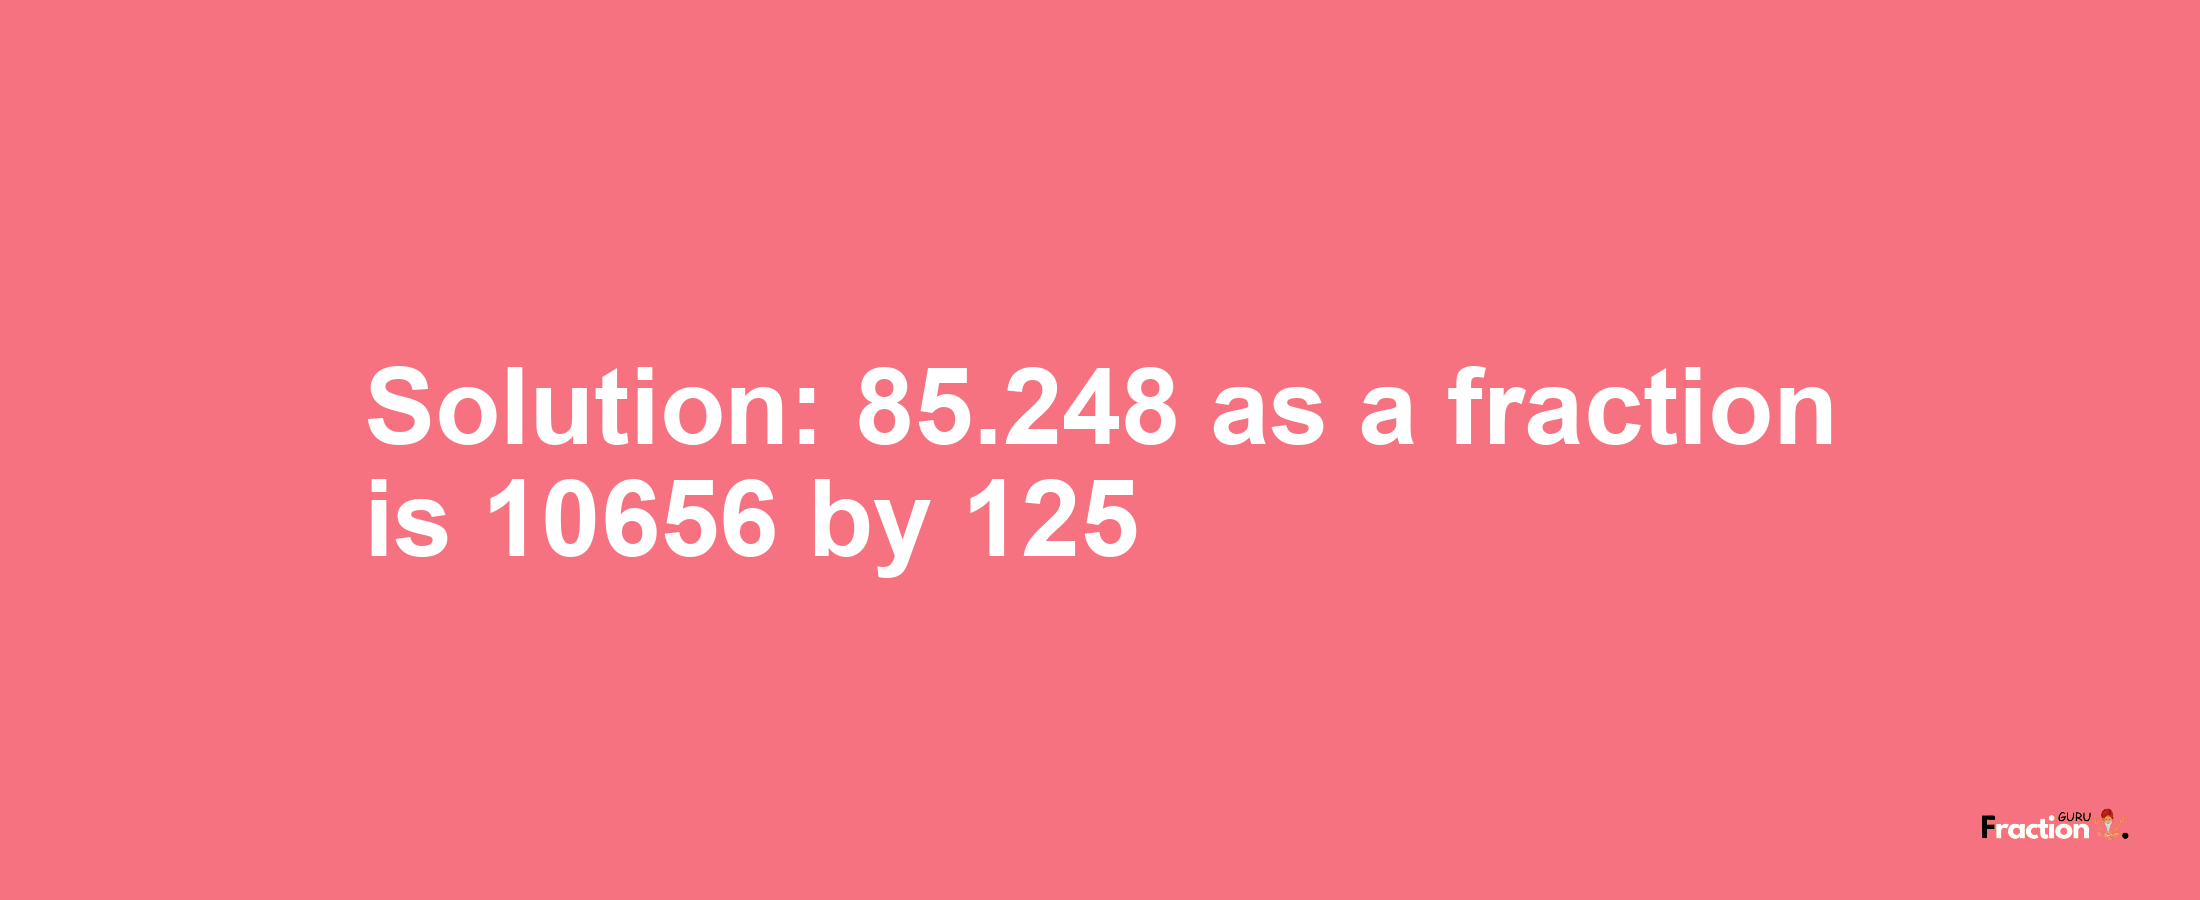 Solution:85.248 as a fraction is 10656/125